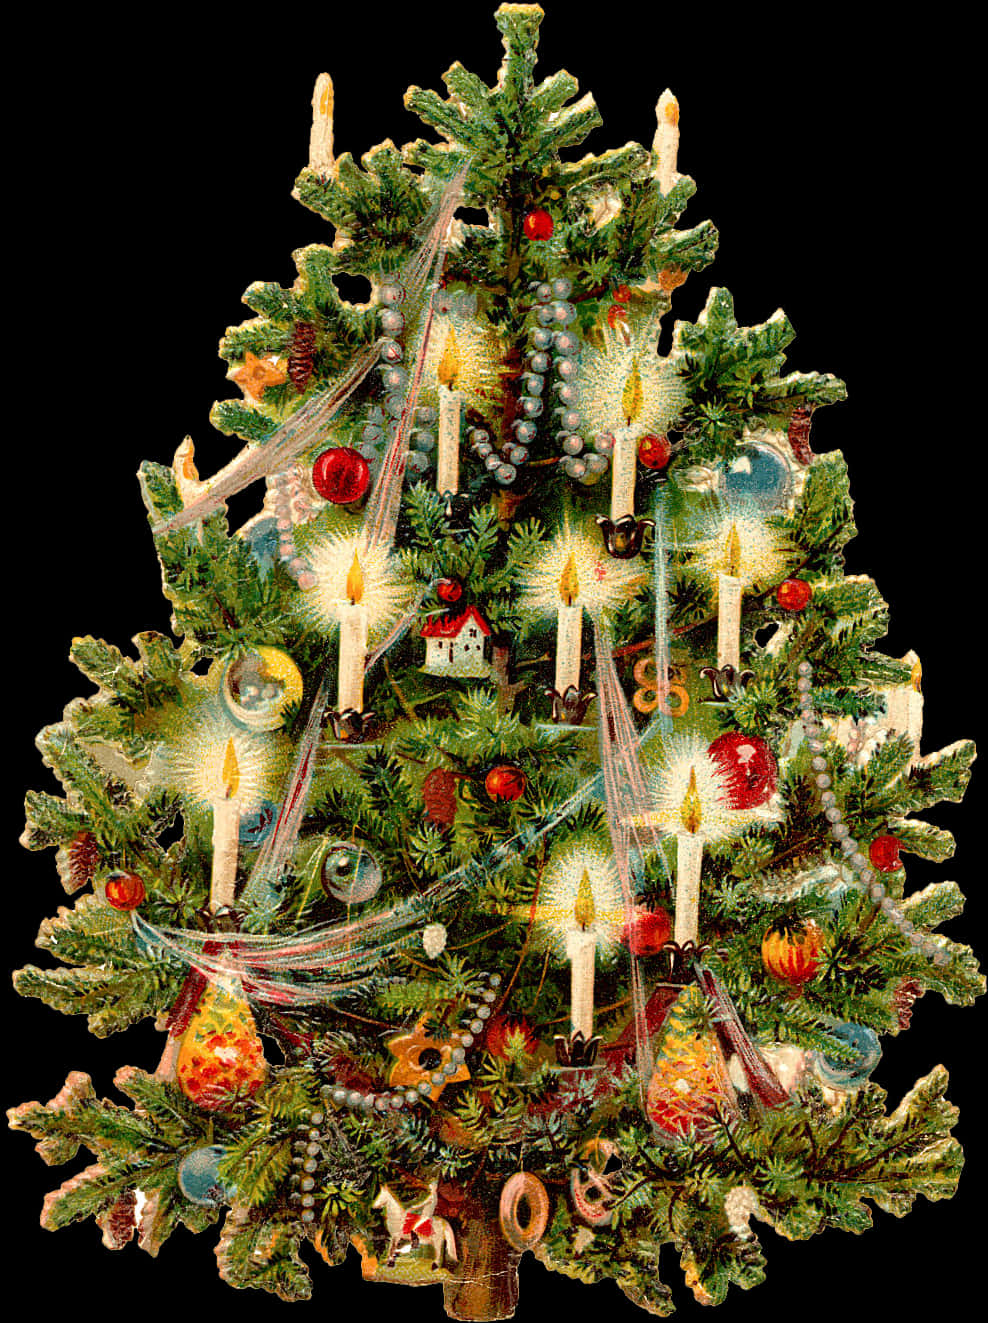 A Decorated Christmas Tree With Candles And Ornaments